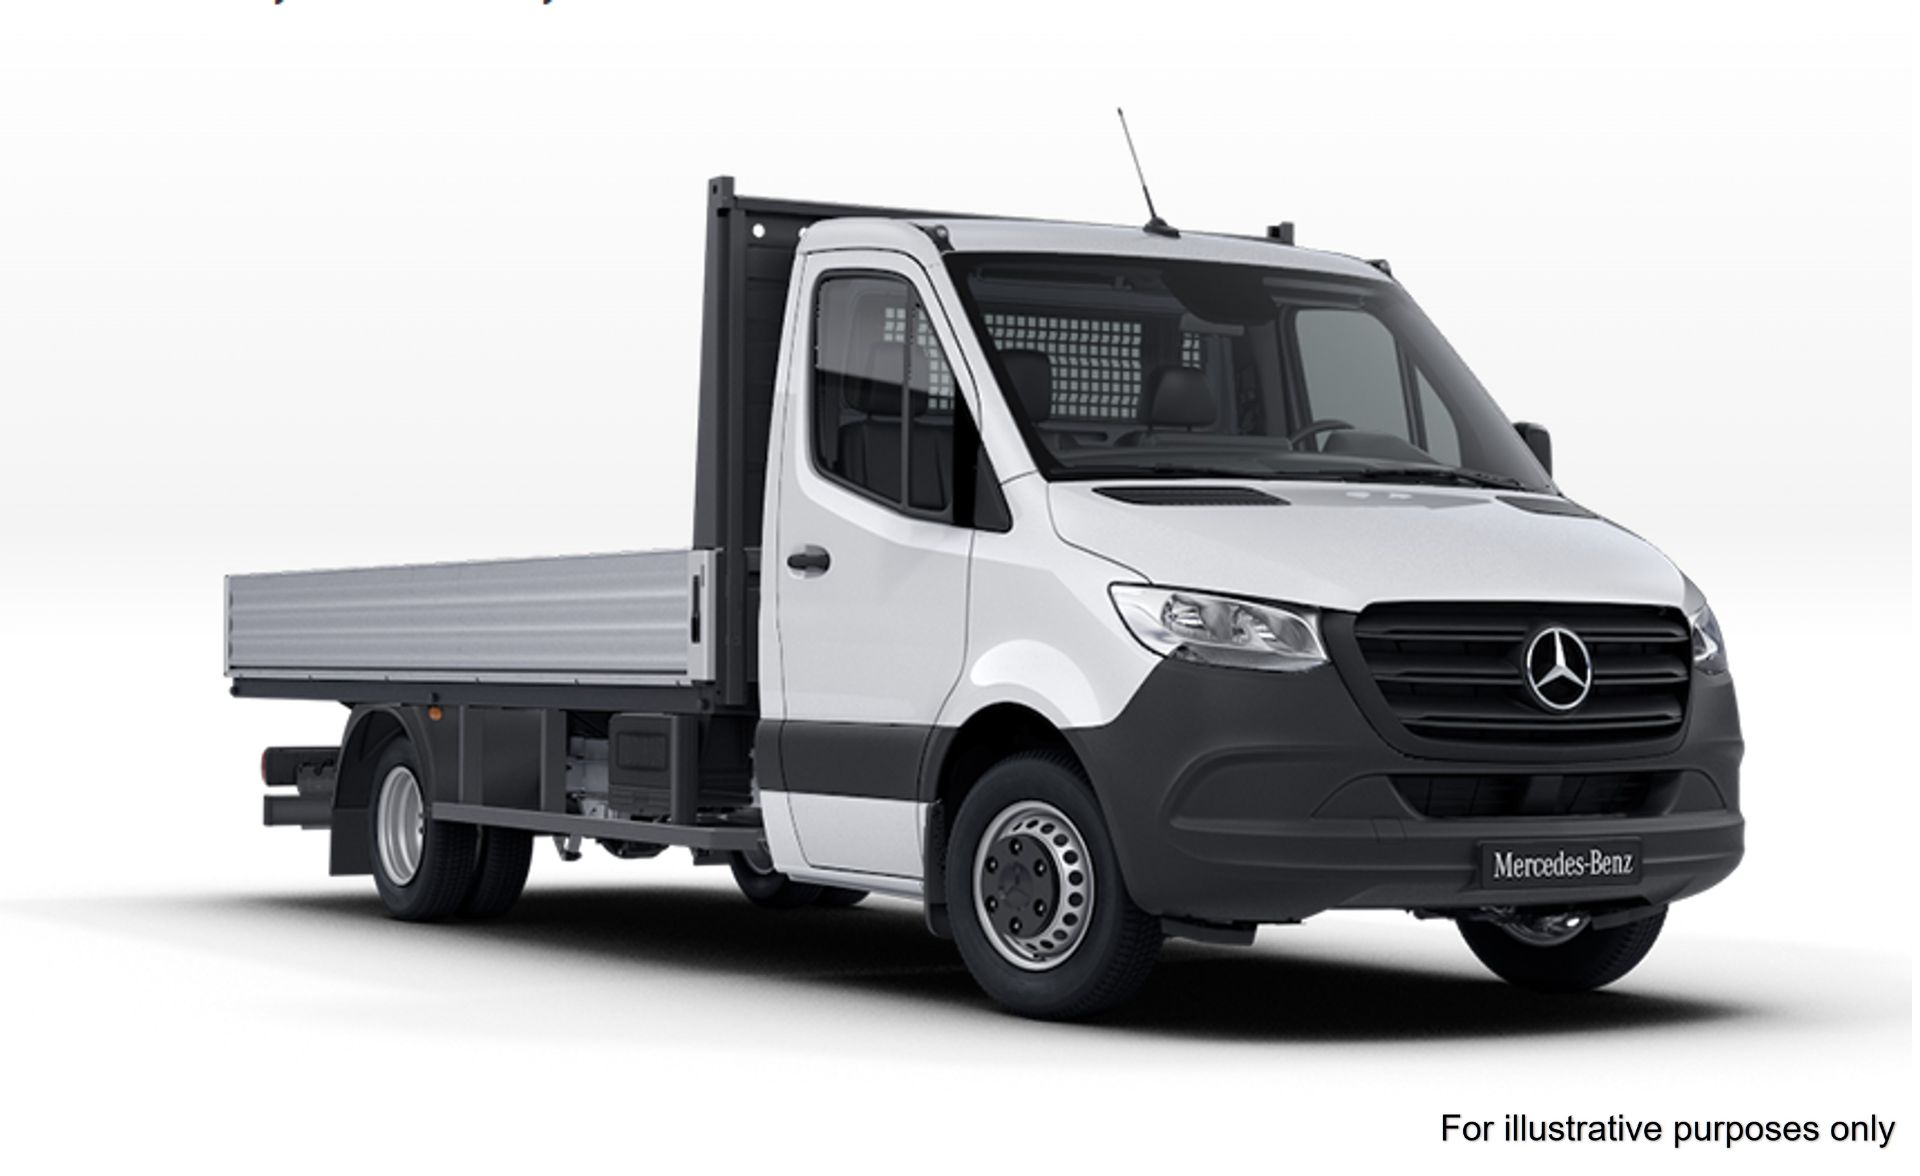 2019 Mercedes-Benz Sprinter 314 CDI LWB DROP SIDE WITH TAIL LIFT EURO 6  (KT68NNG)